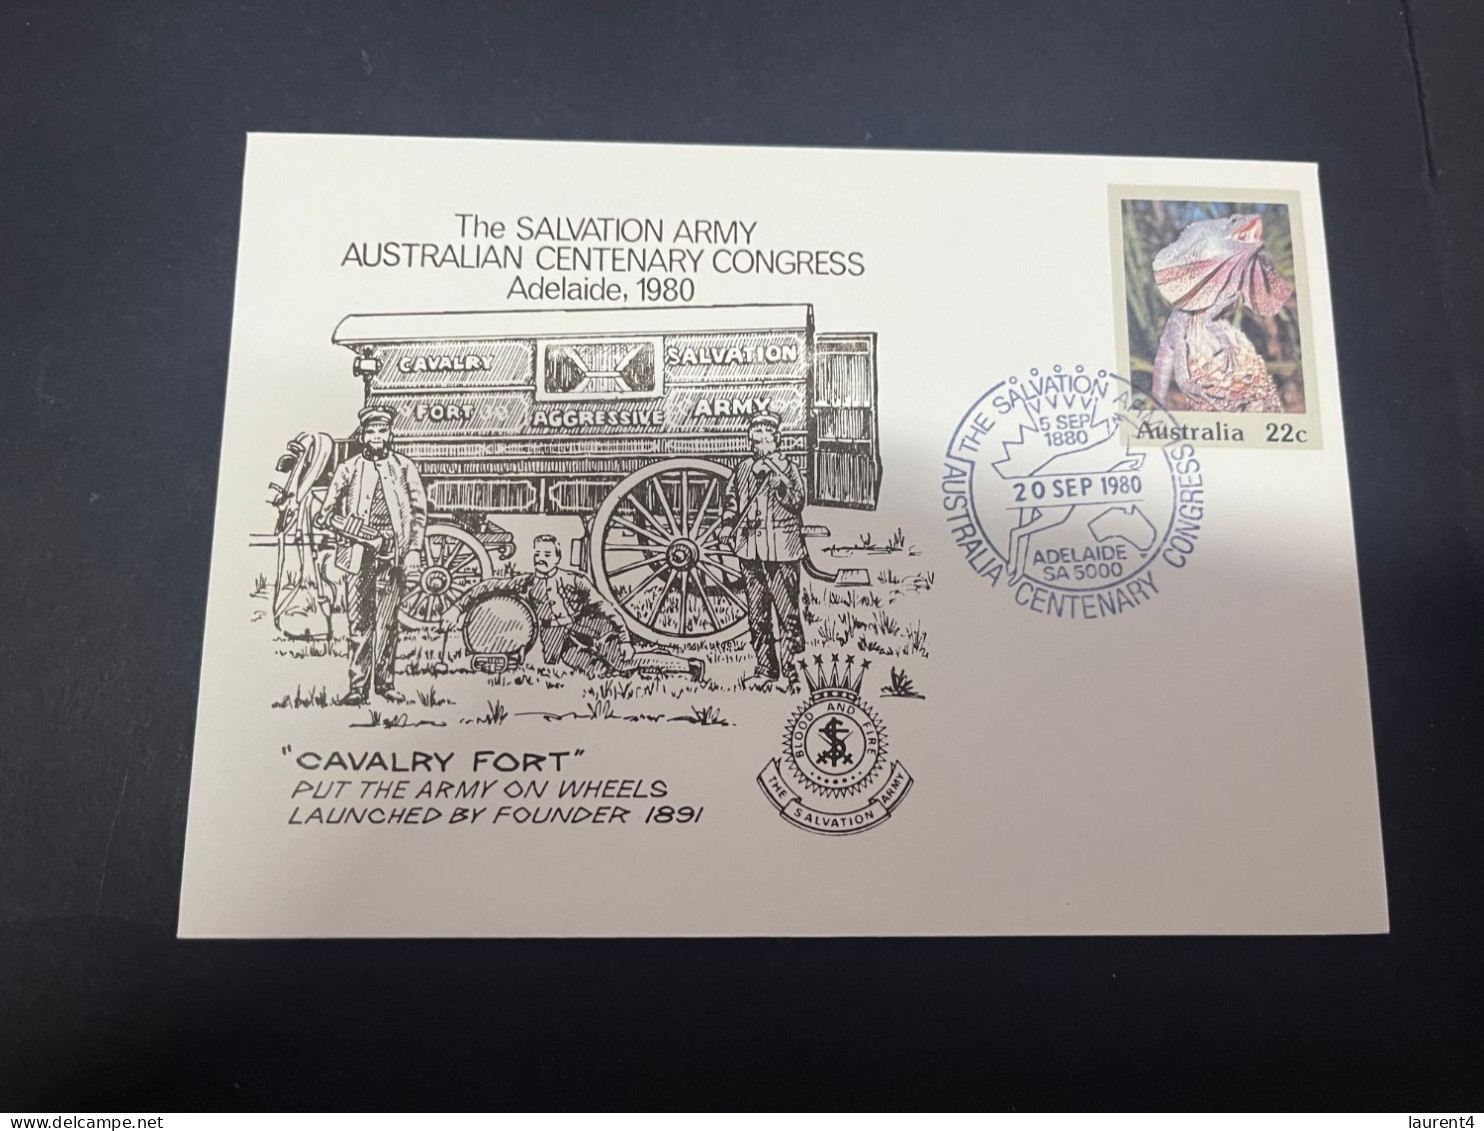 2-5-2024 (3 Z 39) Australia FDC (1 Covers) 1980 - Salvation Army Australian Centenary Congress In Adelaide (Frill Lizard - Premiers Jours (FDC)